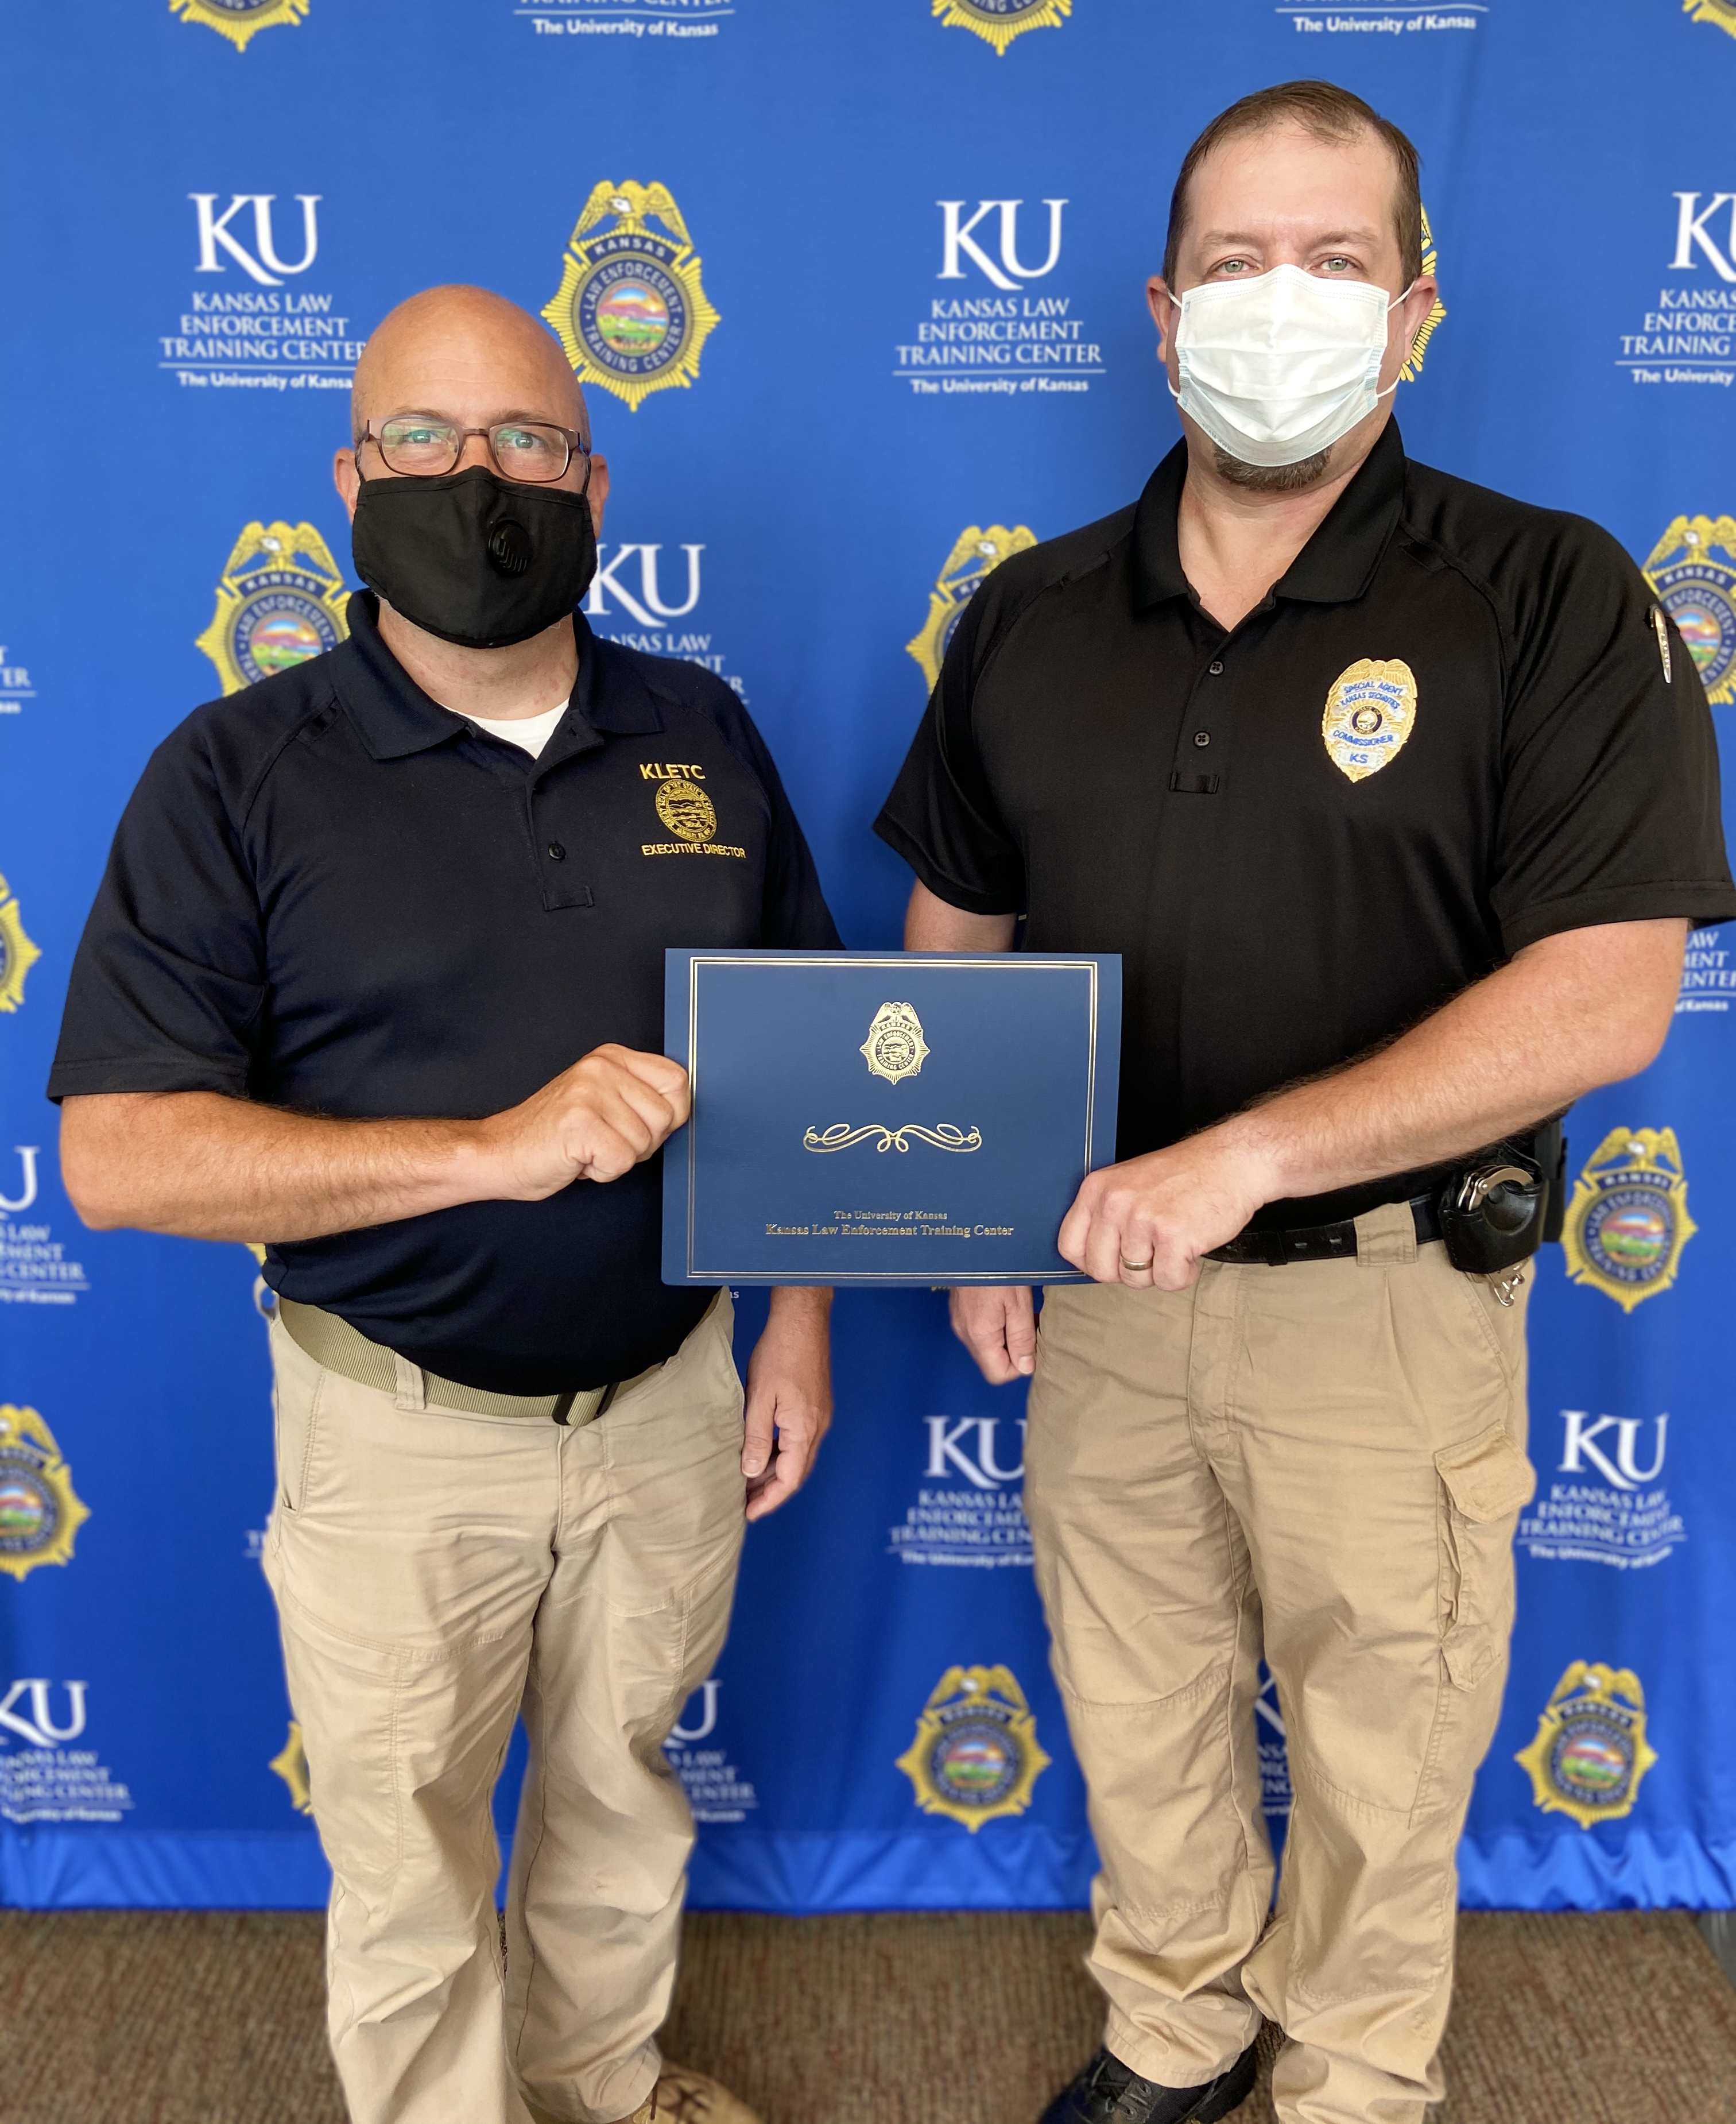 Ryan Morton, Special Agent with the Kansas Securities Commission, poses with his certificate with KLETC Executive Director Darin Beck.